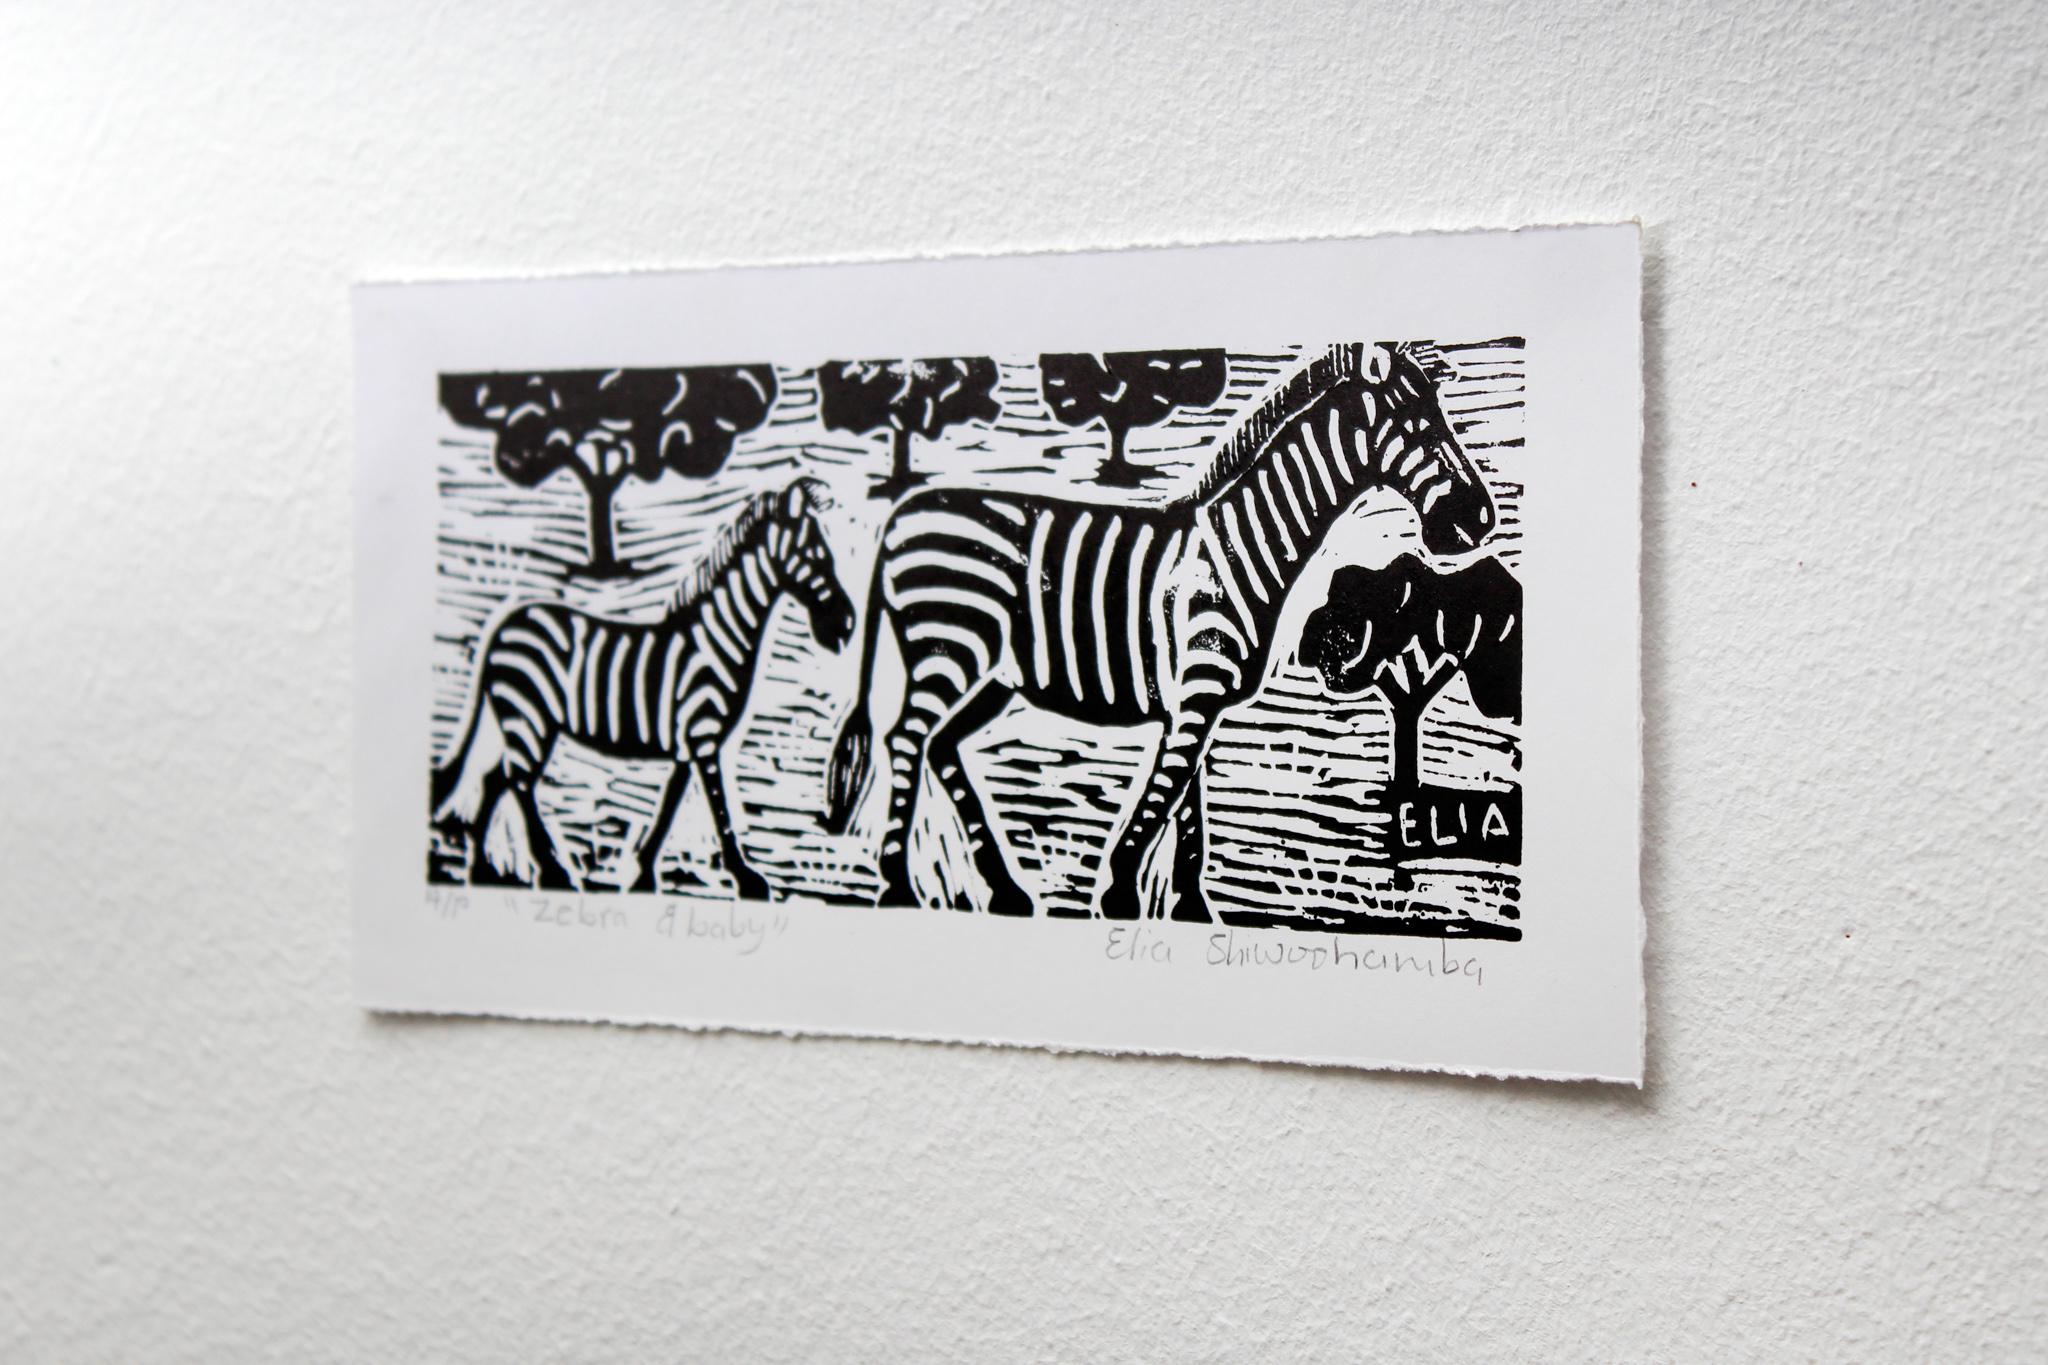 Zebra and baby, Linoleum block prints on paper.

Elia Shiwoohamba was born in 1981 in Windhoek, Namibia. He graduated from the John Muafangejo Art Centre in Windhoek in 2006. Specialising in printmaking and sculpture, Shiwoohamba works as a